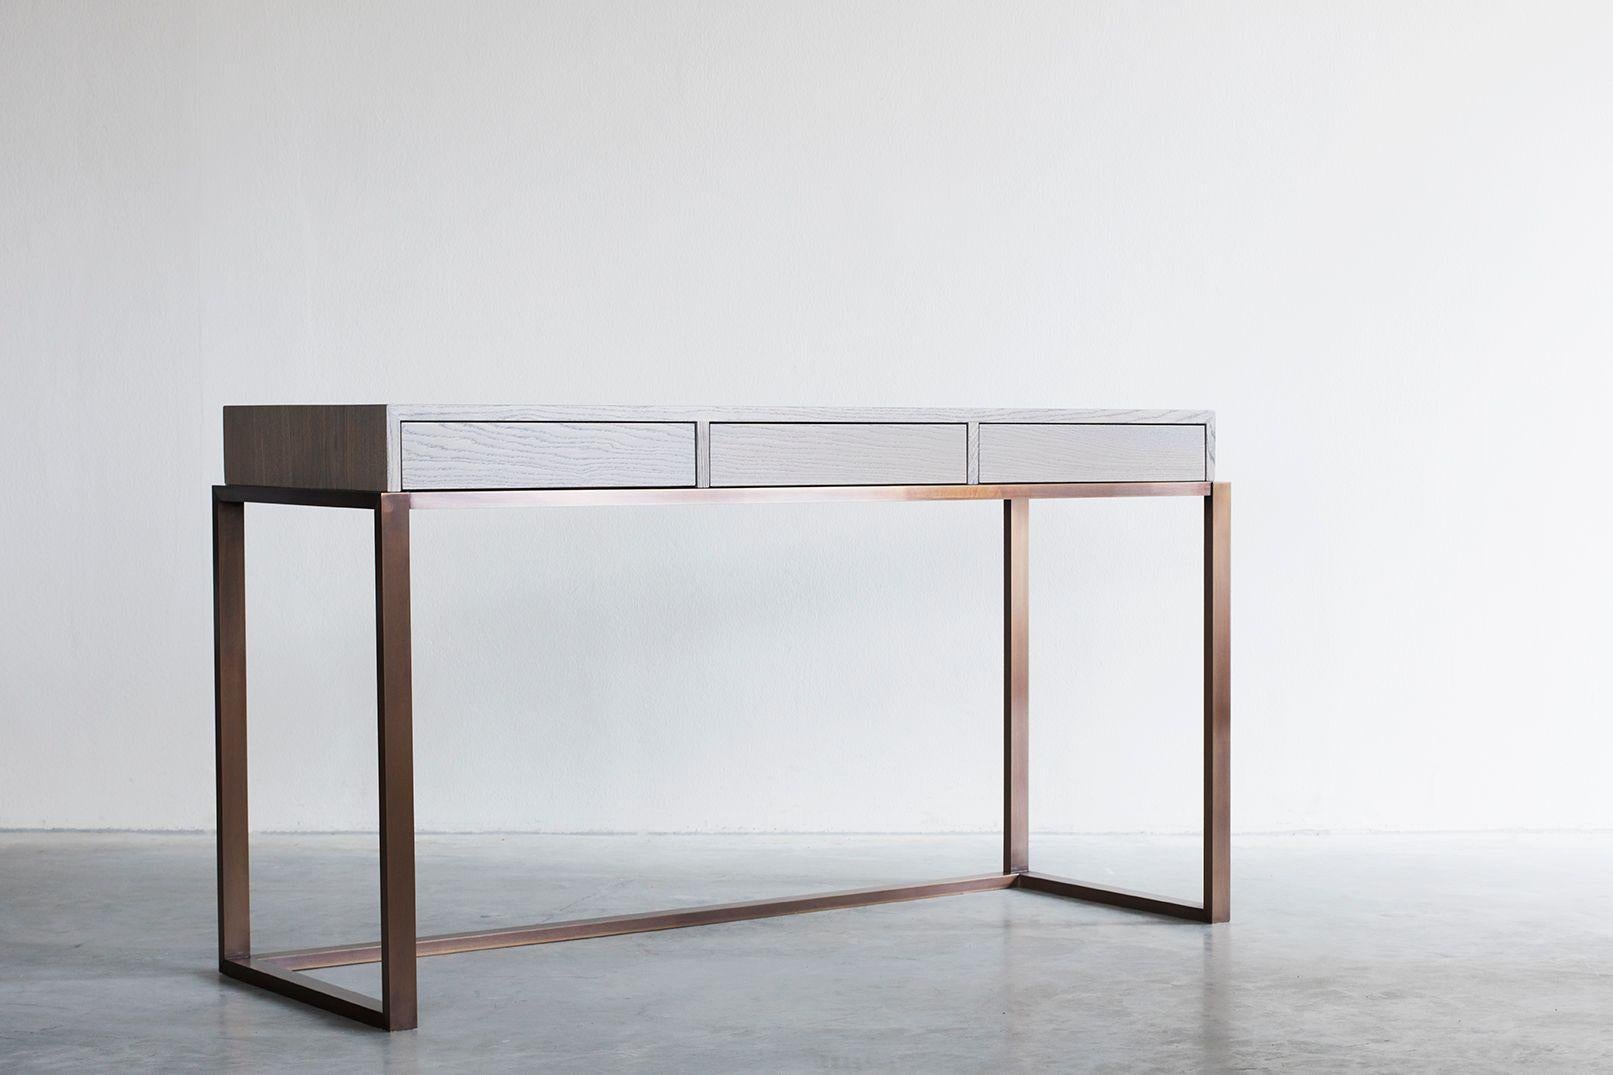 Nota Bene console table by Van Rossum
Dimensions: D150 x W50 x H75 cm
Materials: Oak, brass.

The wood is available in all standard Van Rossum colors, or in a matching finish to customer’s own sample.
Detailing is available in stainless steel